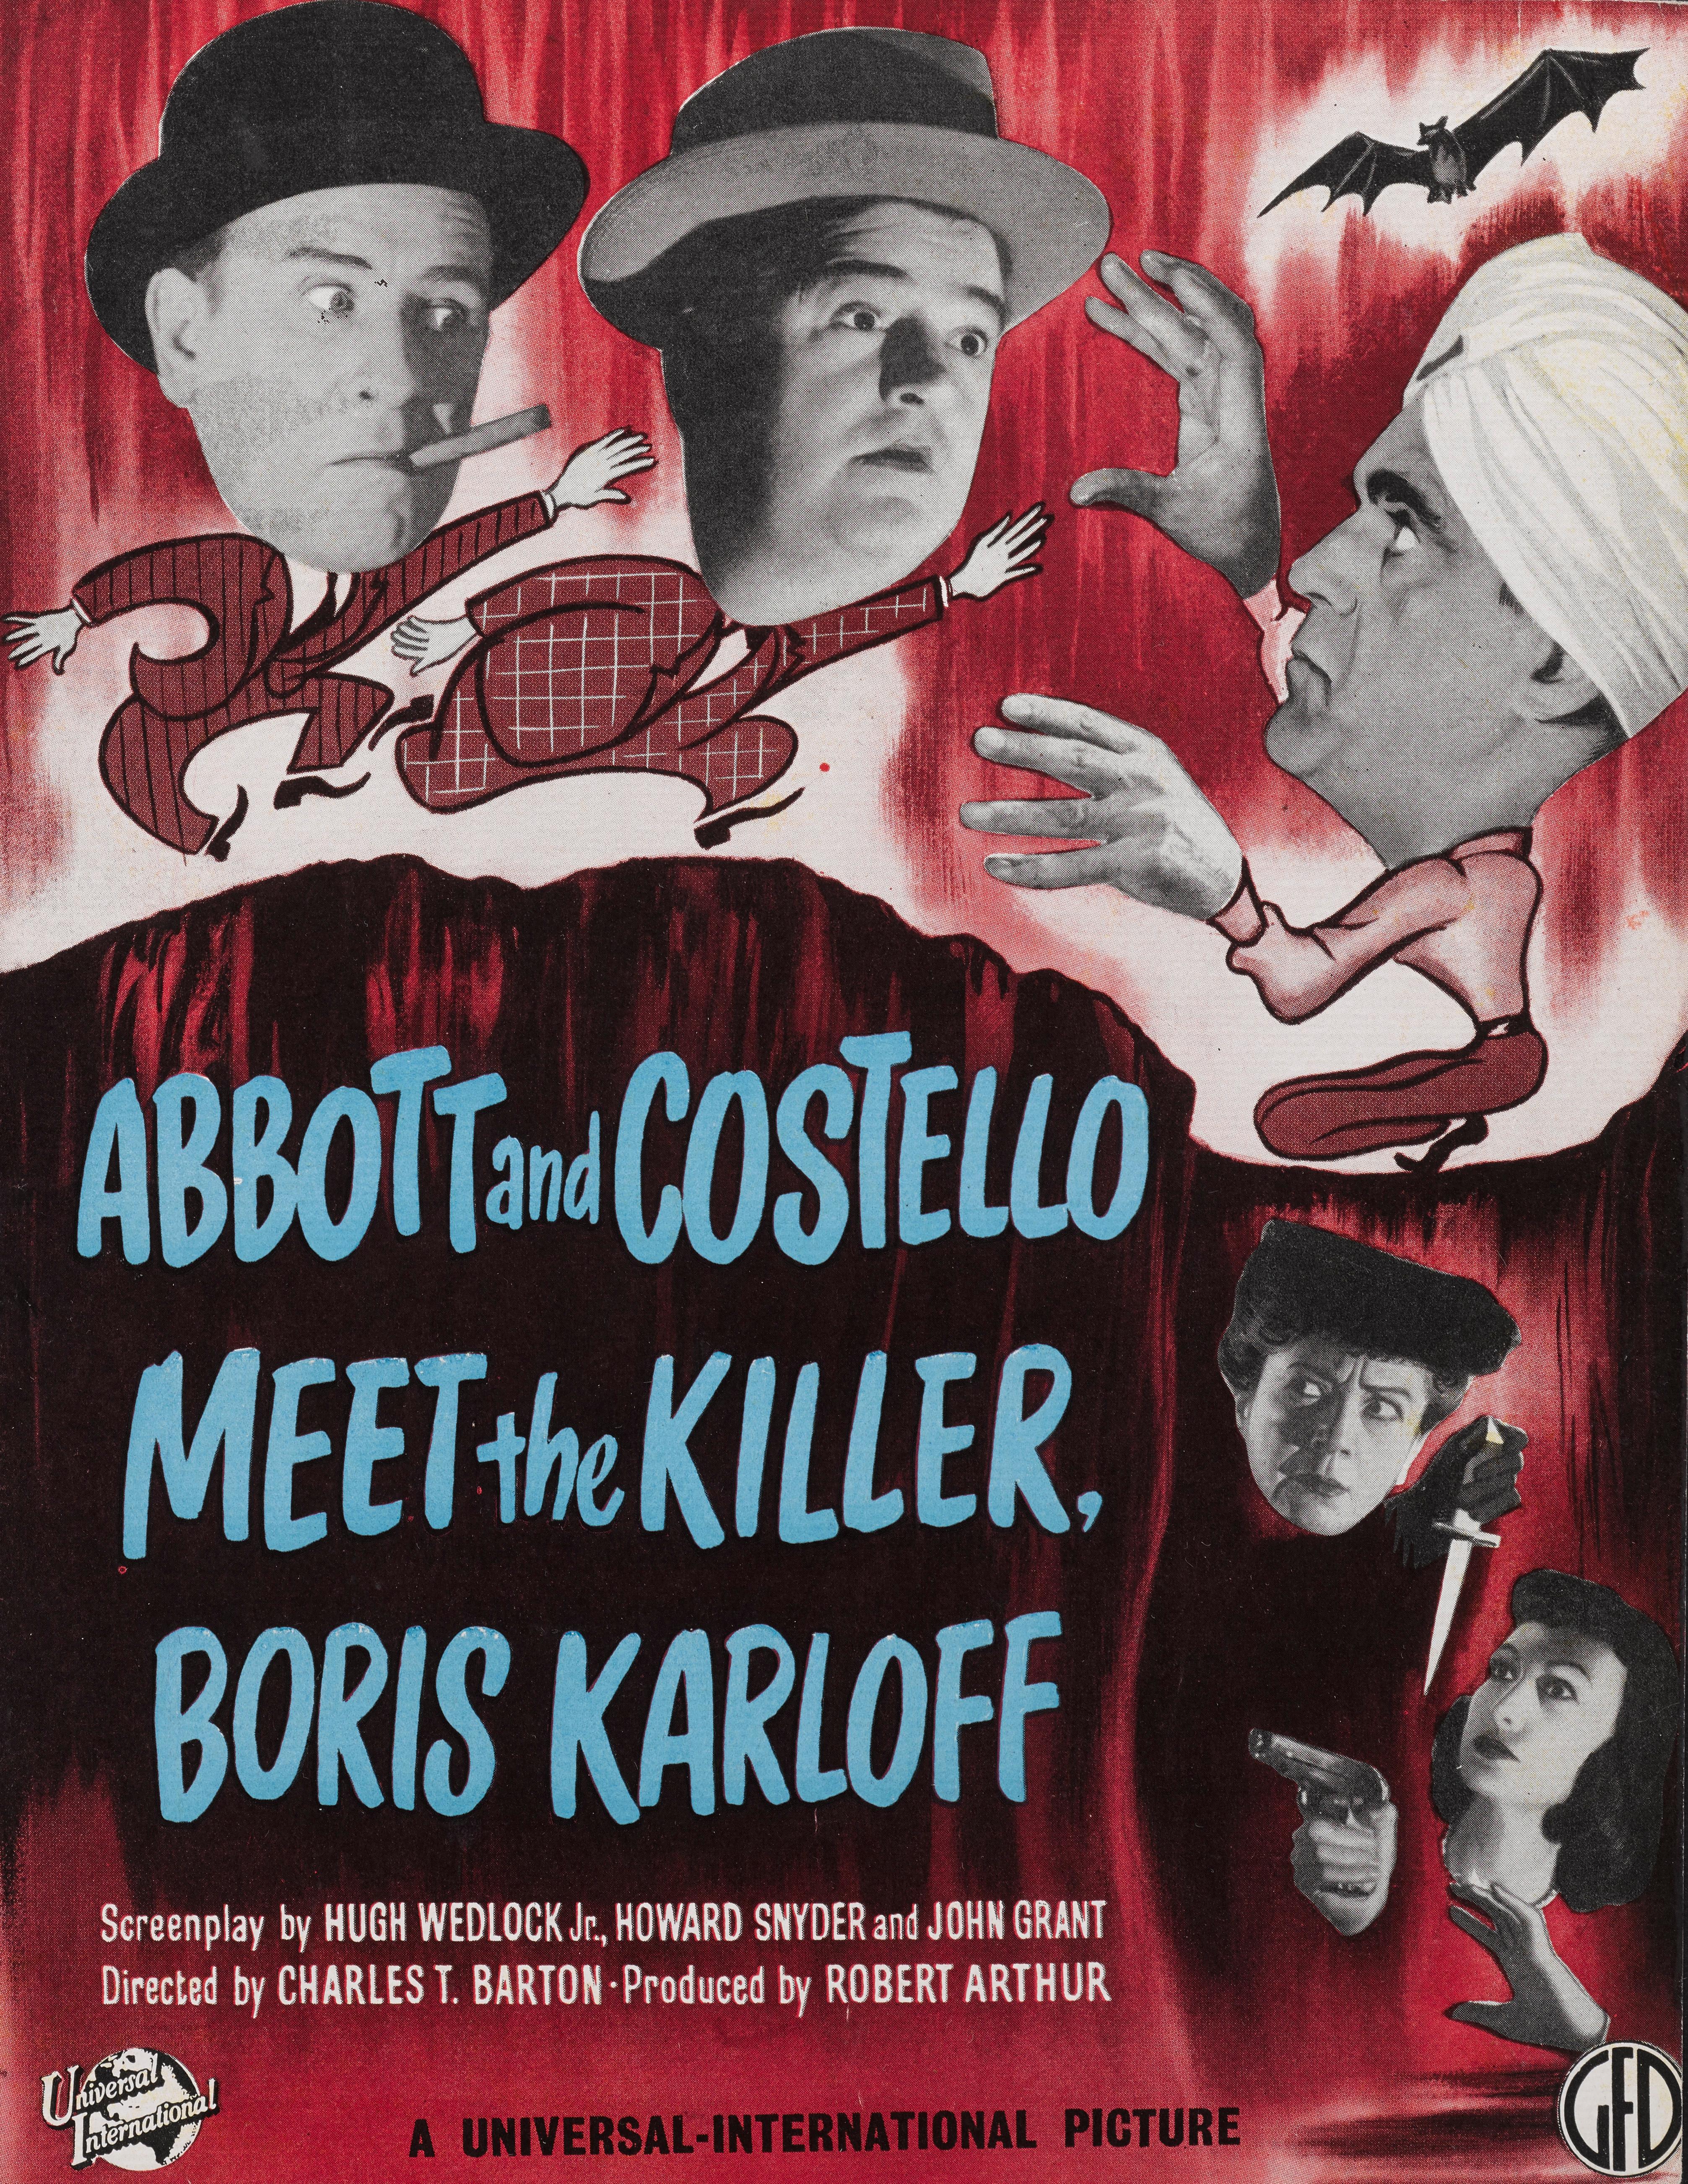 Original British trade advertisement for the 1949 Comedy, Horror Abbott and Costello Meet the Killer, Boris Karloff.
The film was directed by Charles T. Barton and stared Bud Abbott, Lou Costello, Boris Karloff.
The piece is conservation paper